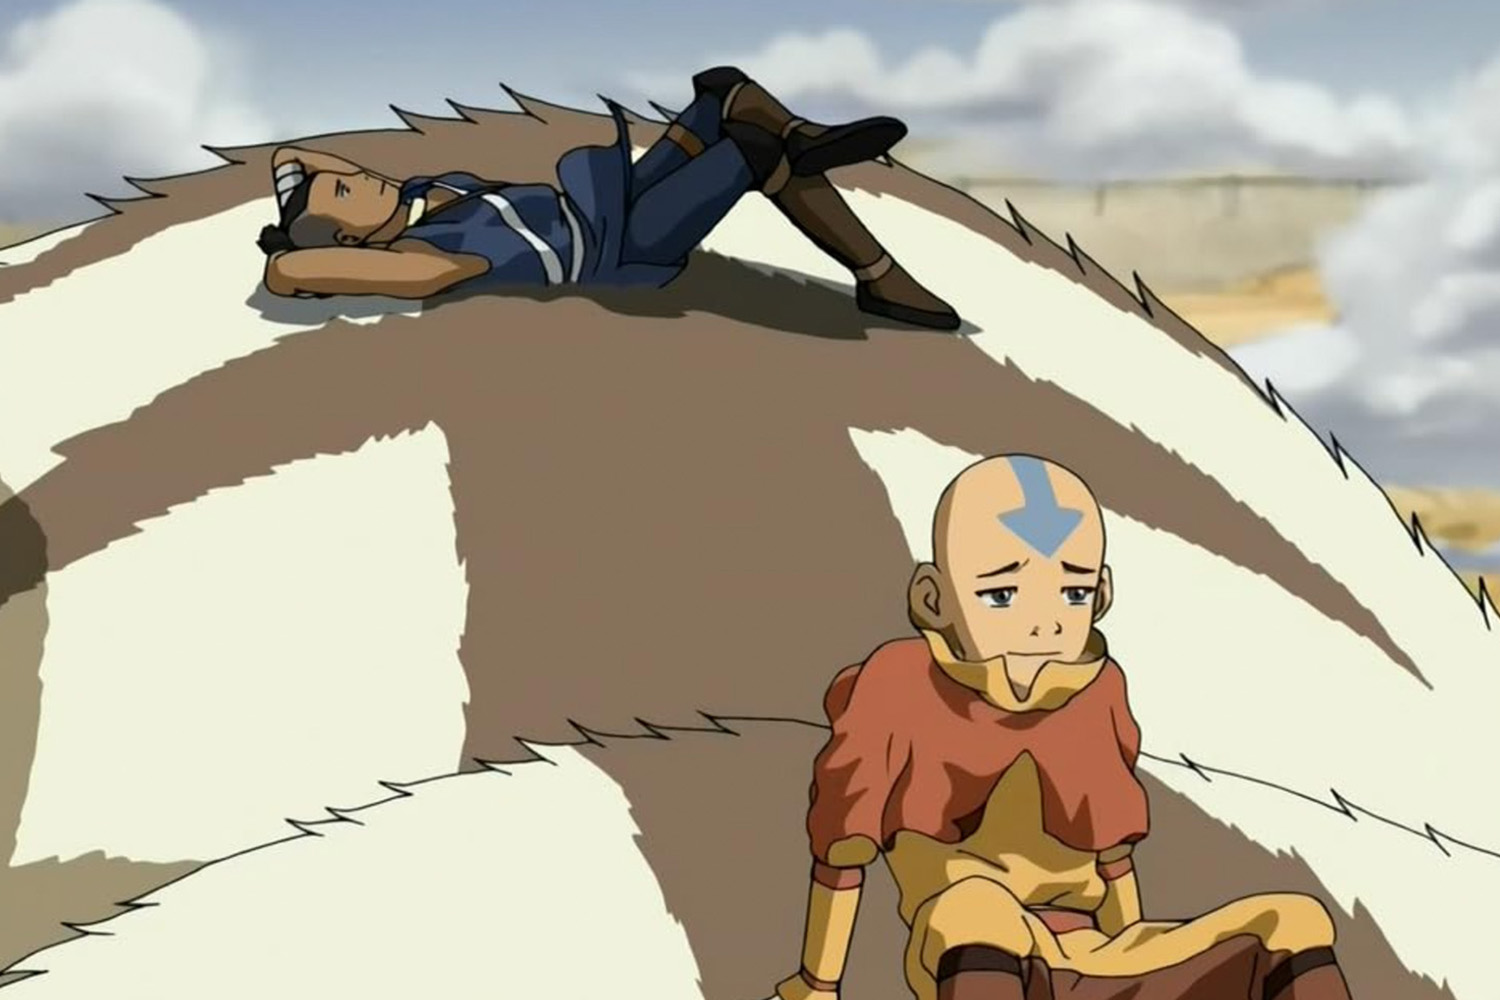 A shot from "Avatar: The Last Airbender," featuring Aang and Sokka resting on the flying bison, Appa.